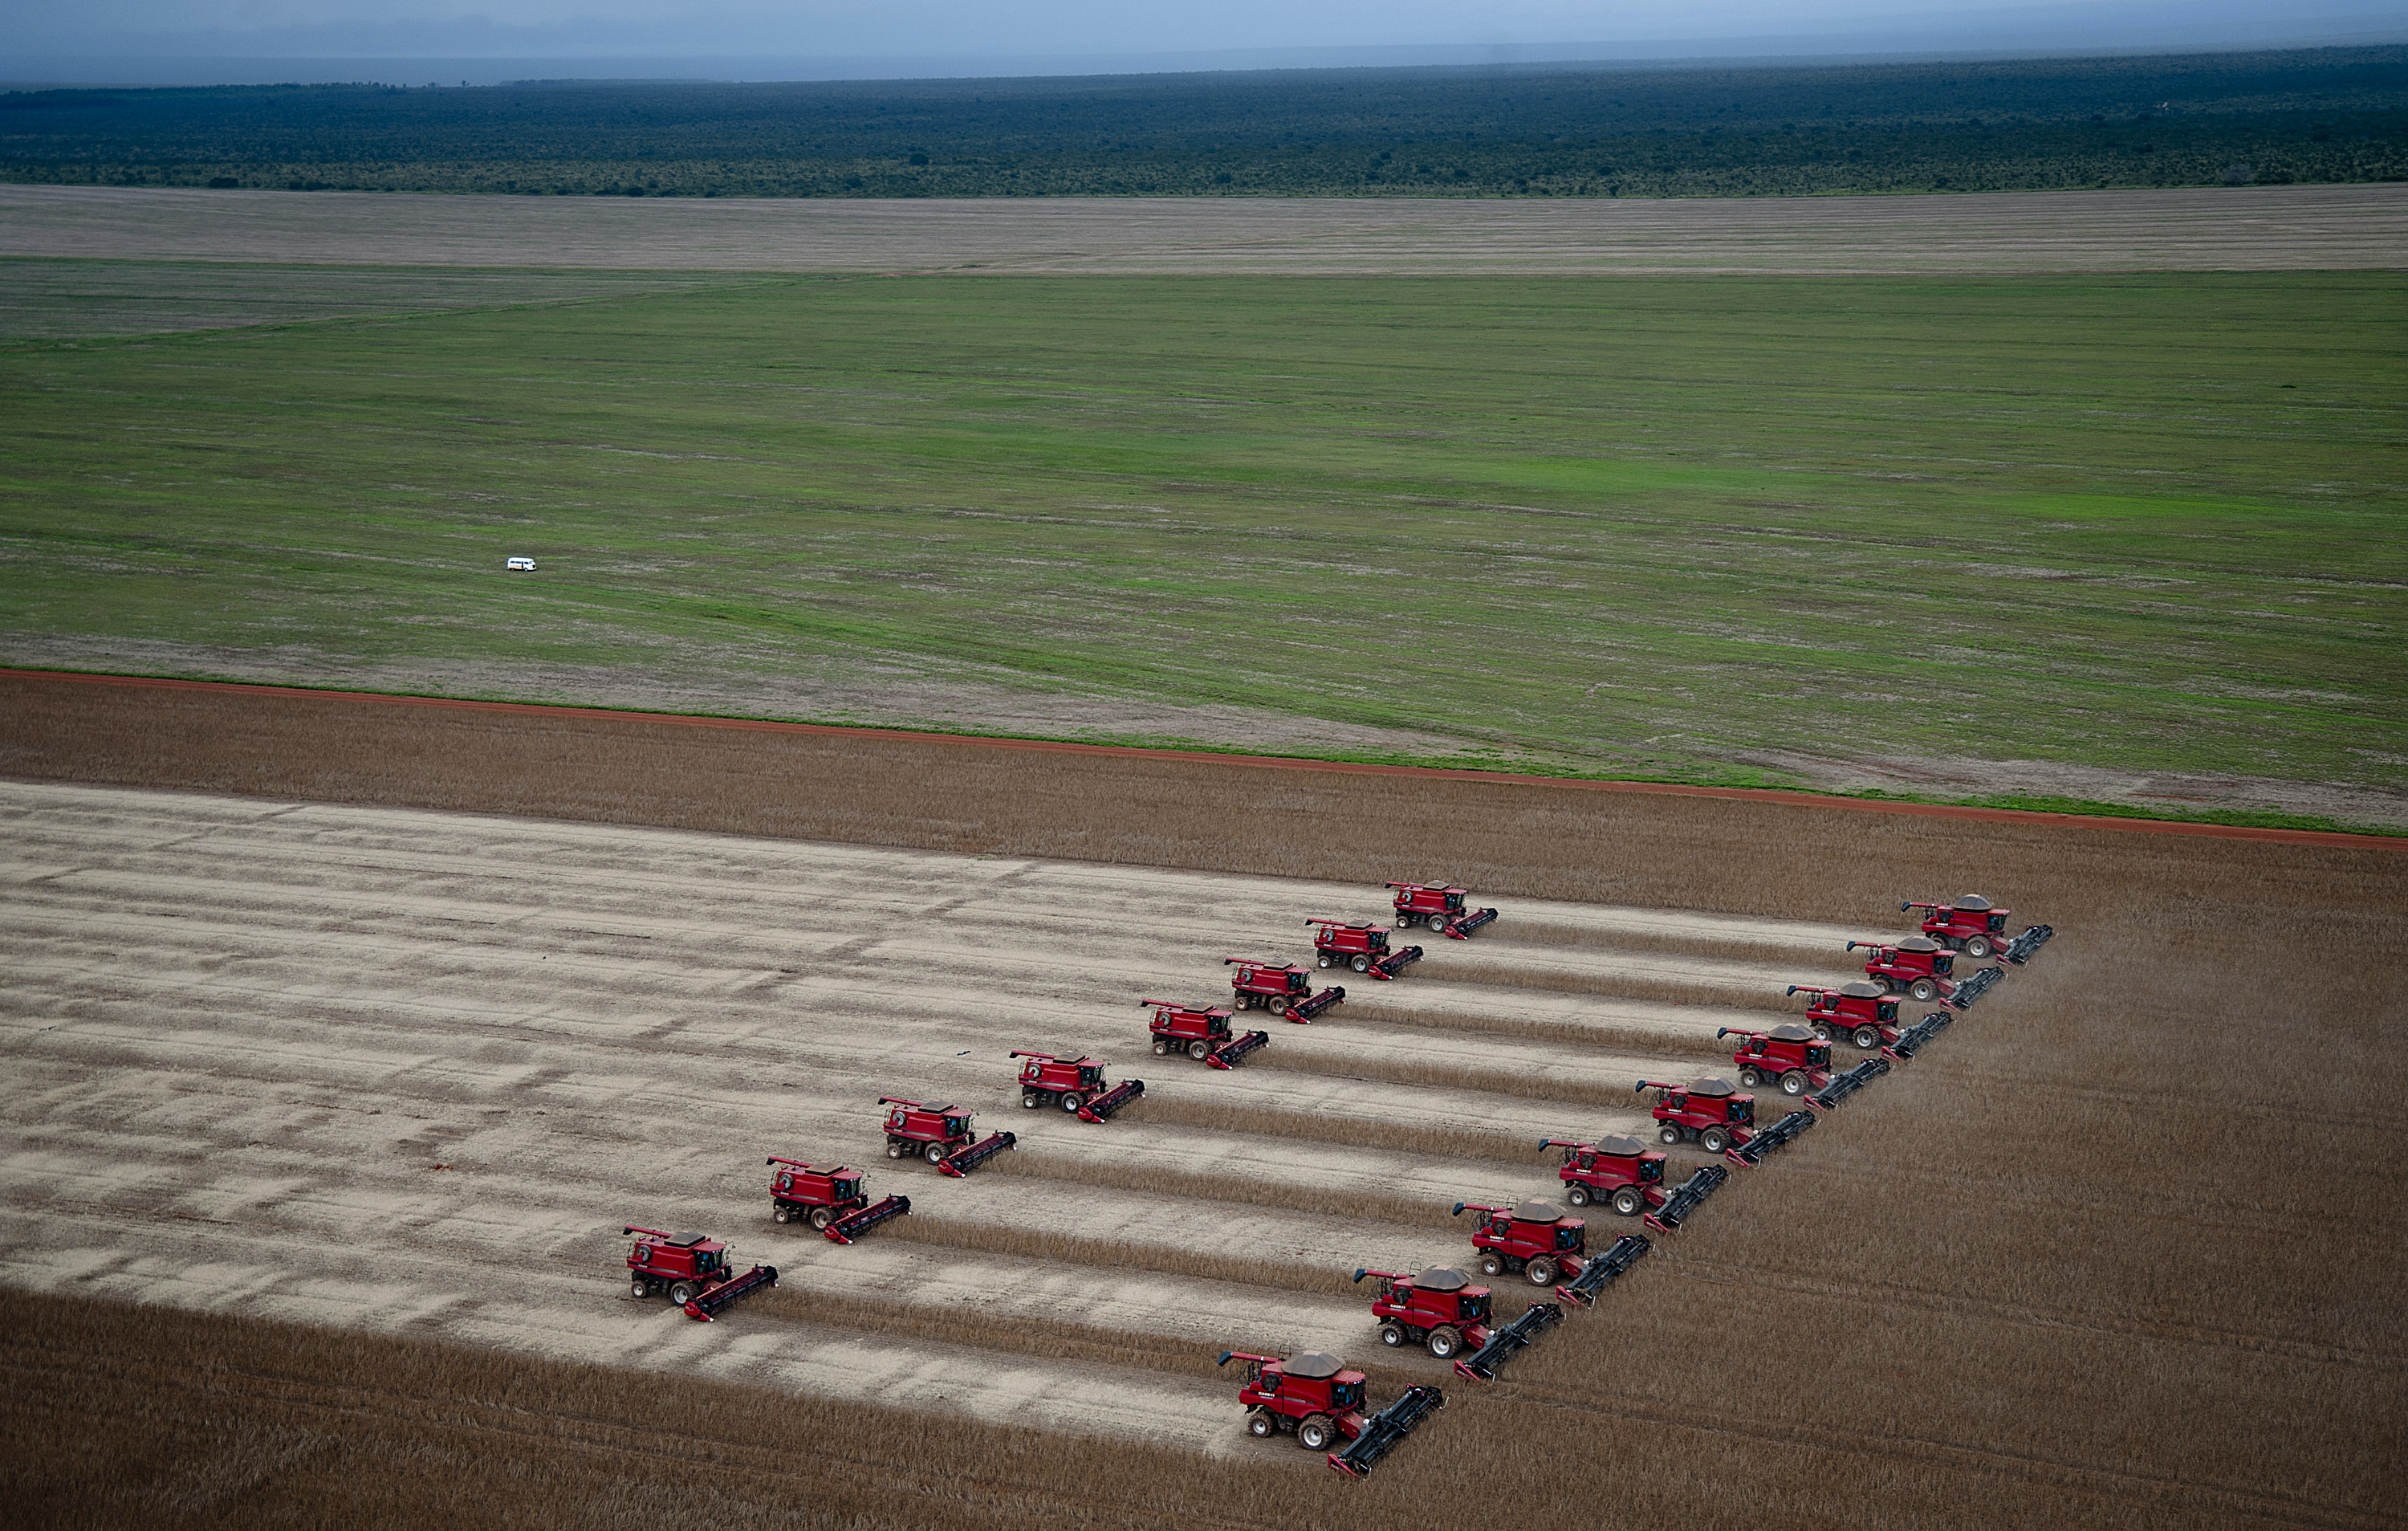 Noble Group's agriculture division reported operating losses of US$83 million, compared with a profit of US$180 million in 2012. Photo: Bloomberg